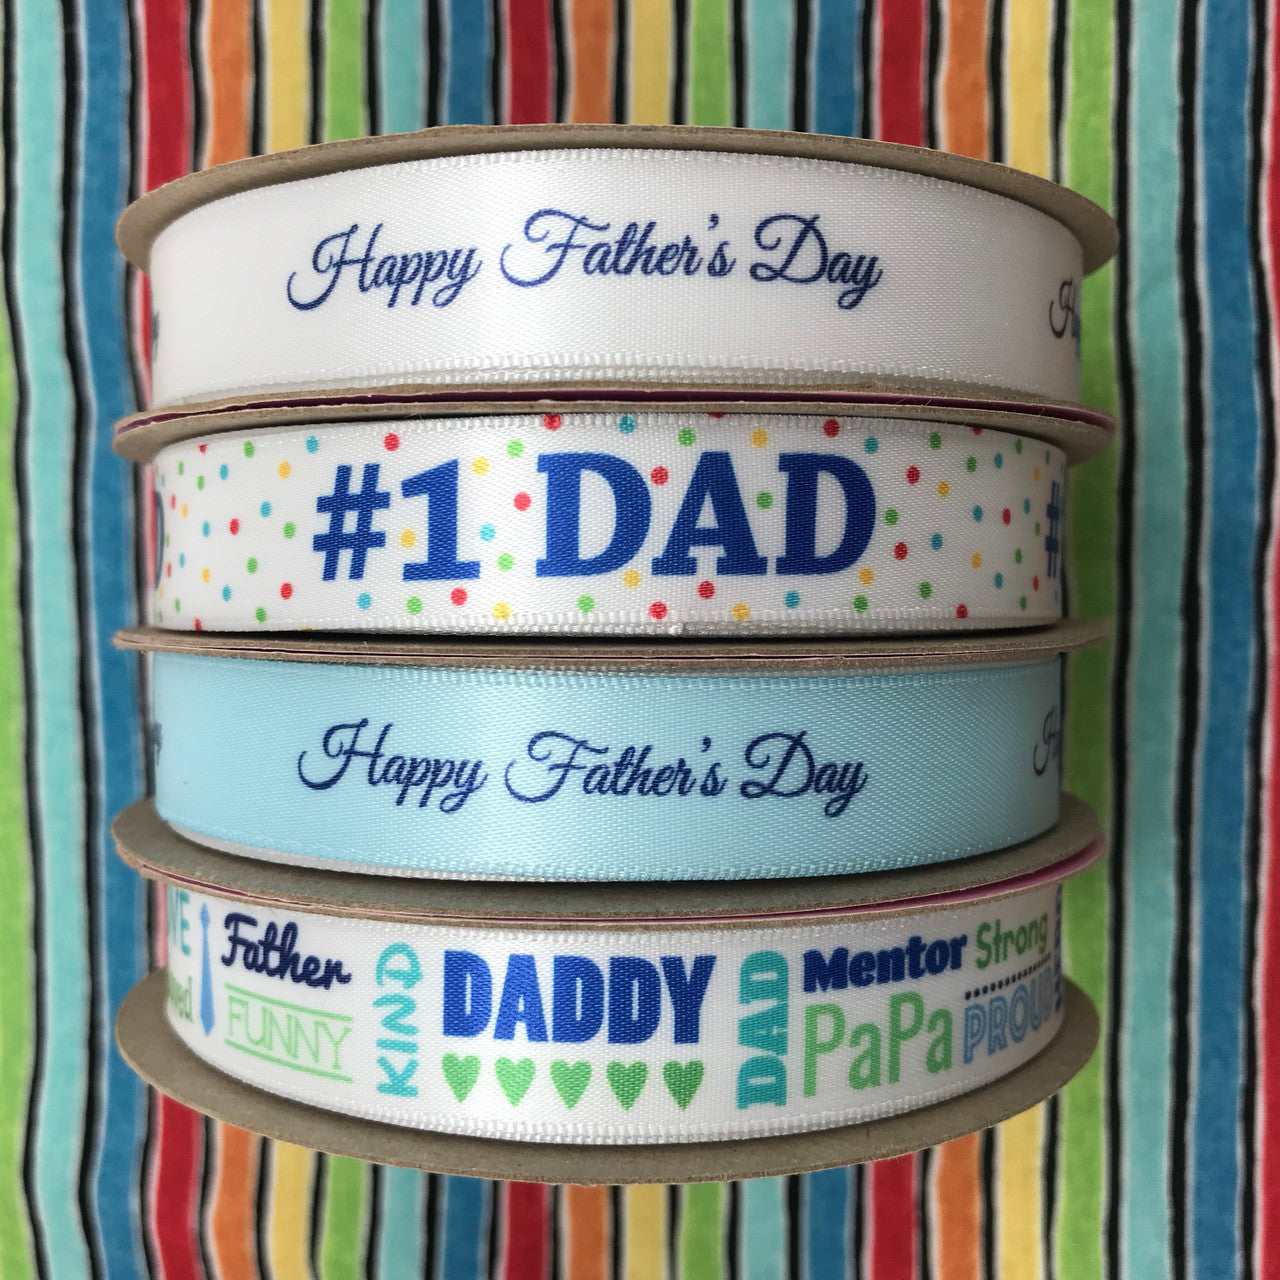 Mix and match all our Father's Day ribbons to make an extra special occasion for Dad!